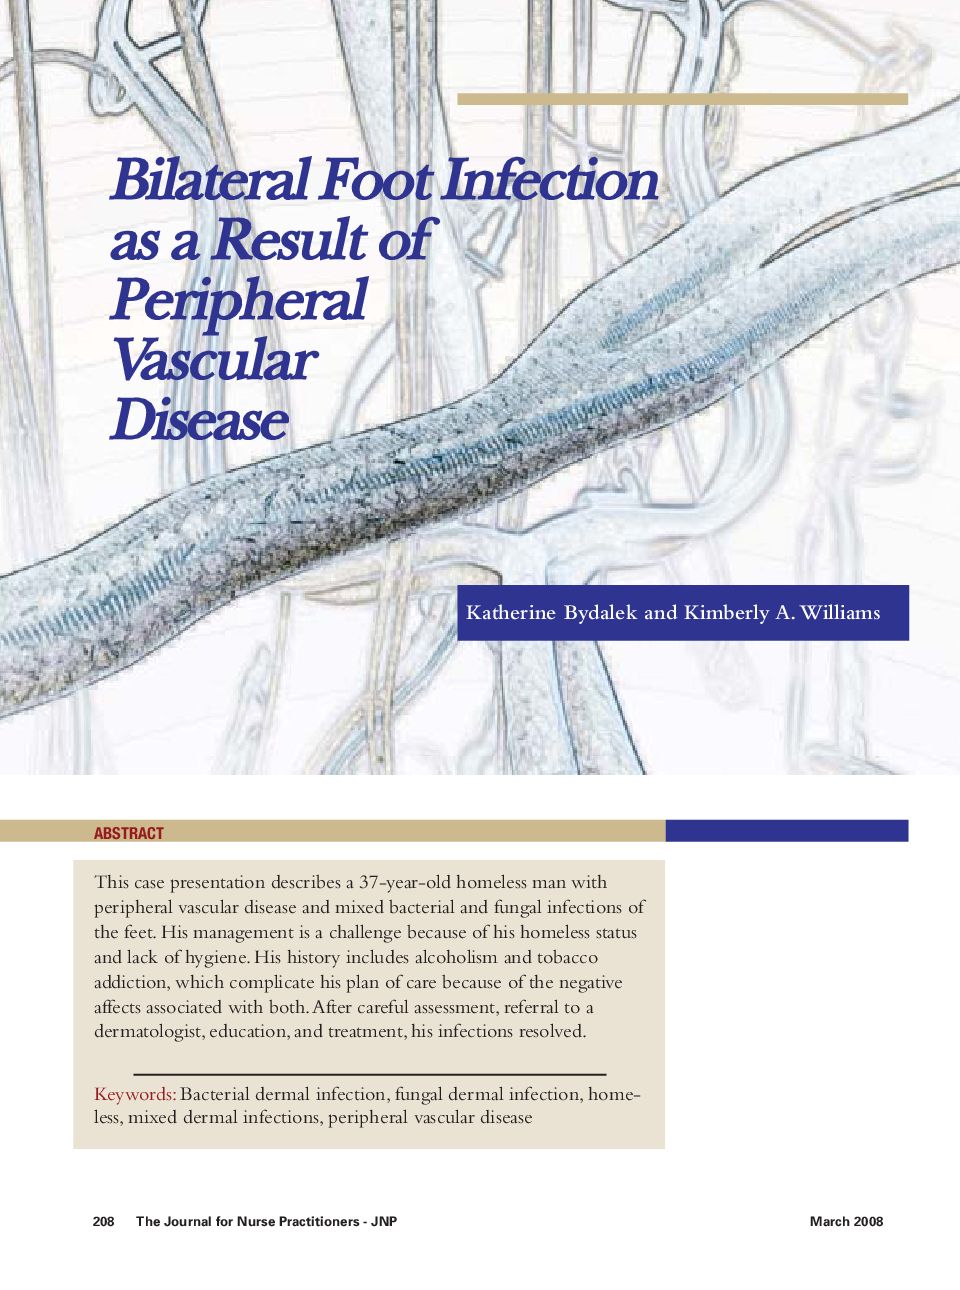 Bilateral Foot Infection as a Result of Peripheral Vascular Disease